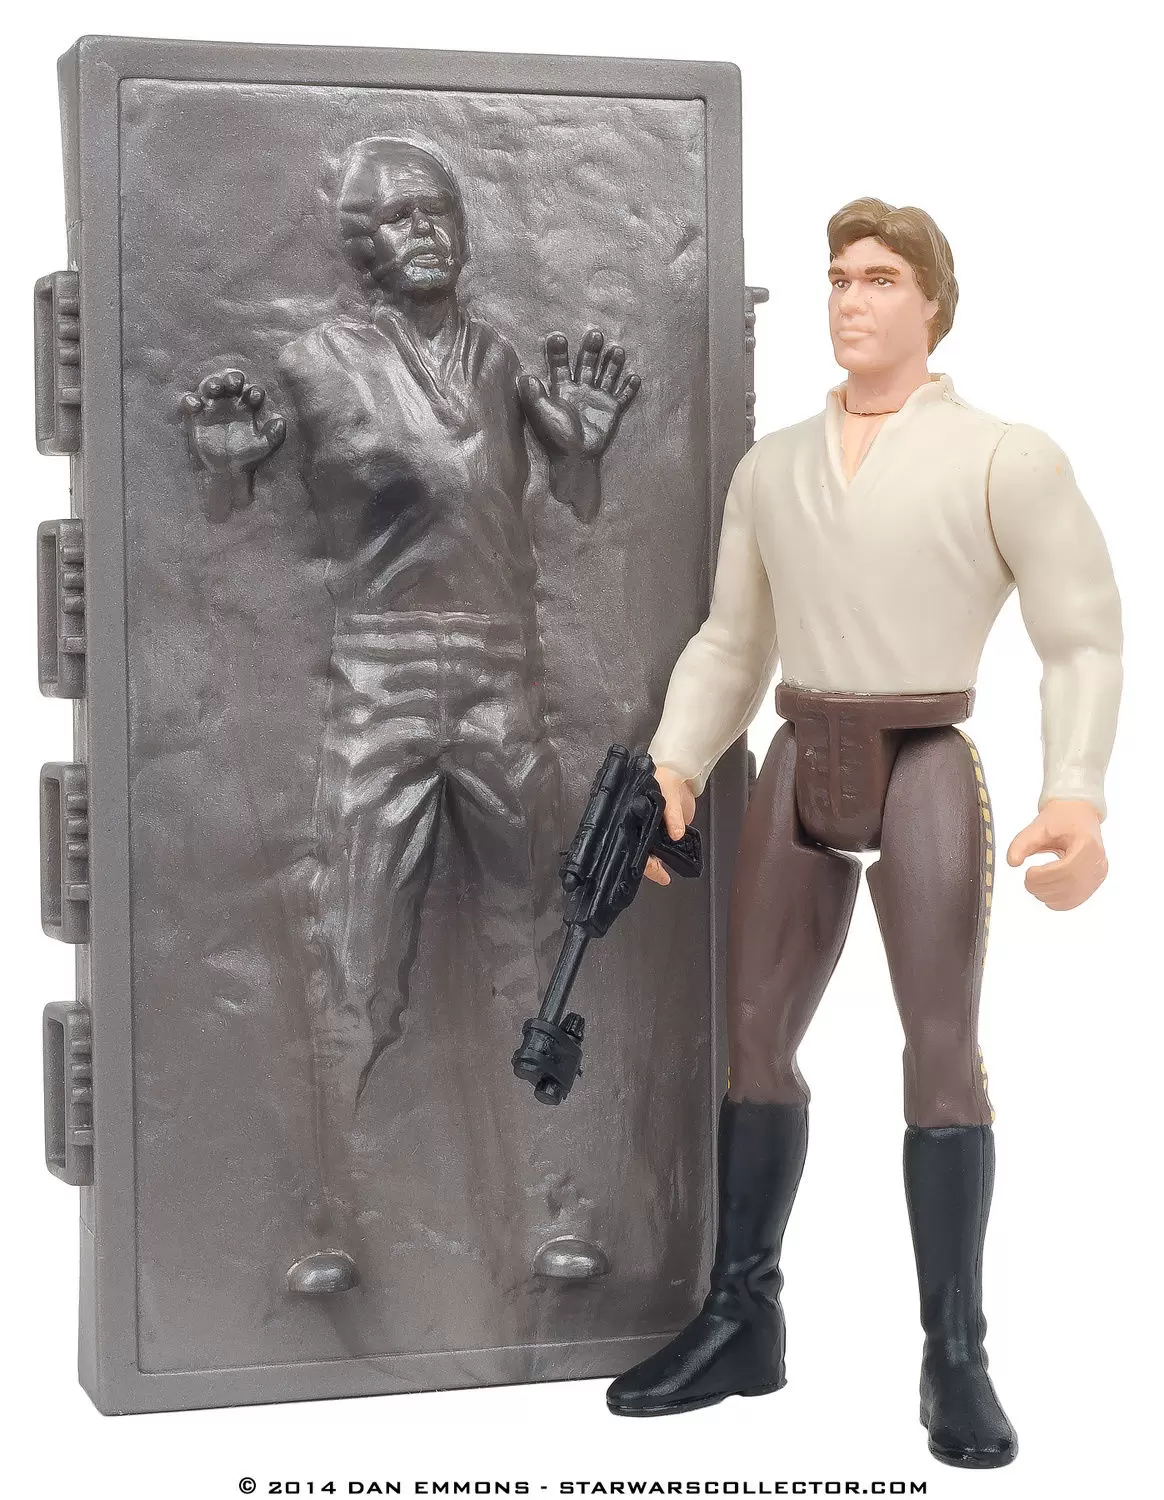 Power of the Force 2 - Han Solo in Carbonite